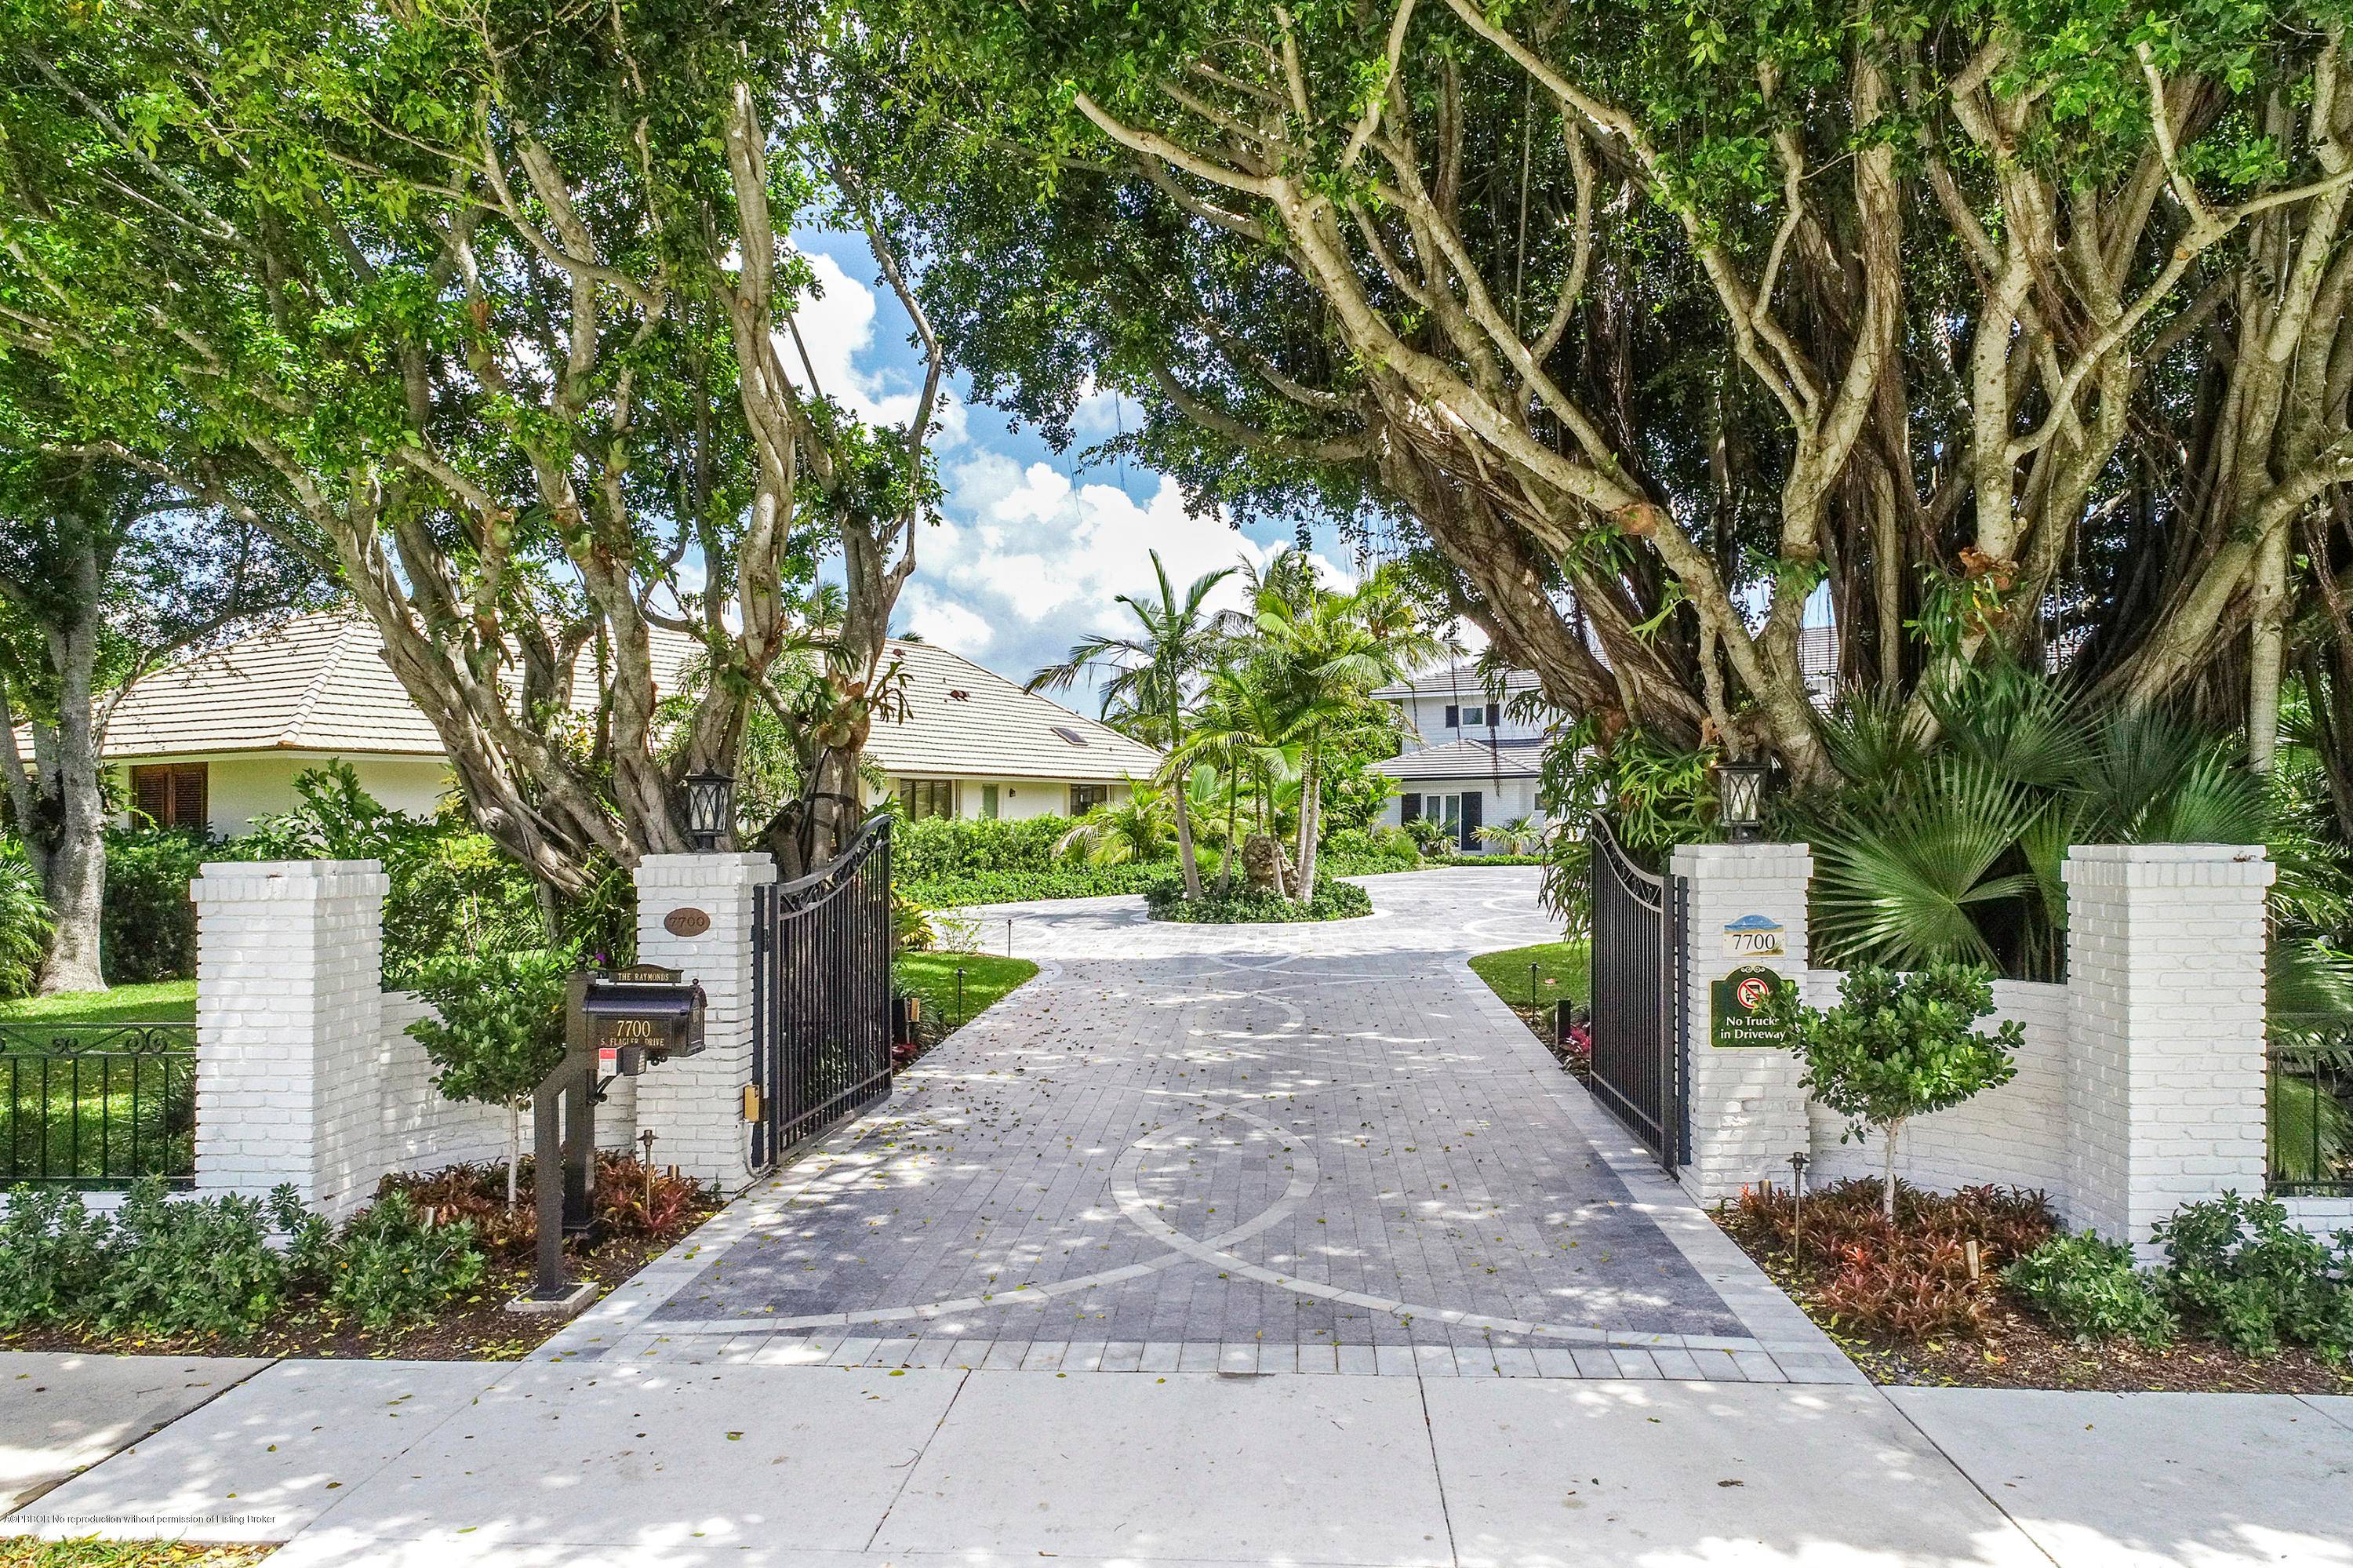 The views of an uninhabited bird sanctuary island from every room make this direct Intracoastal waterfront property unique and highly sought after.